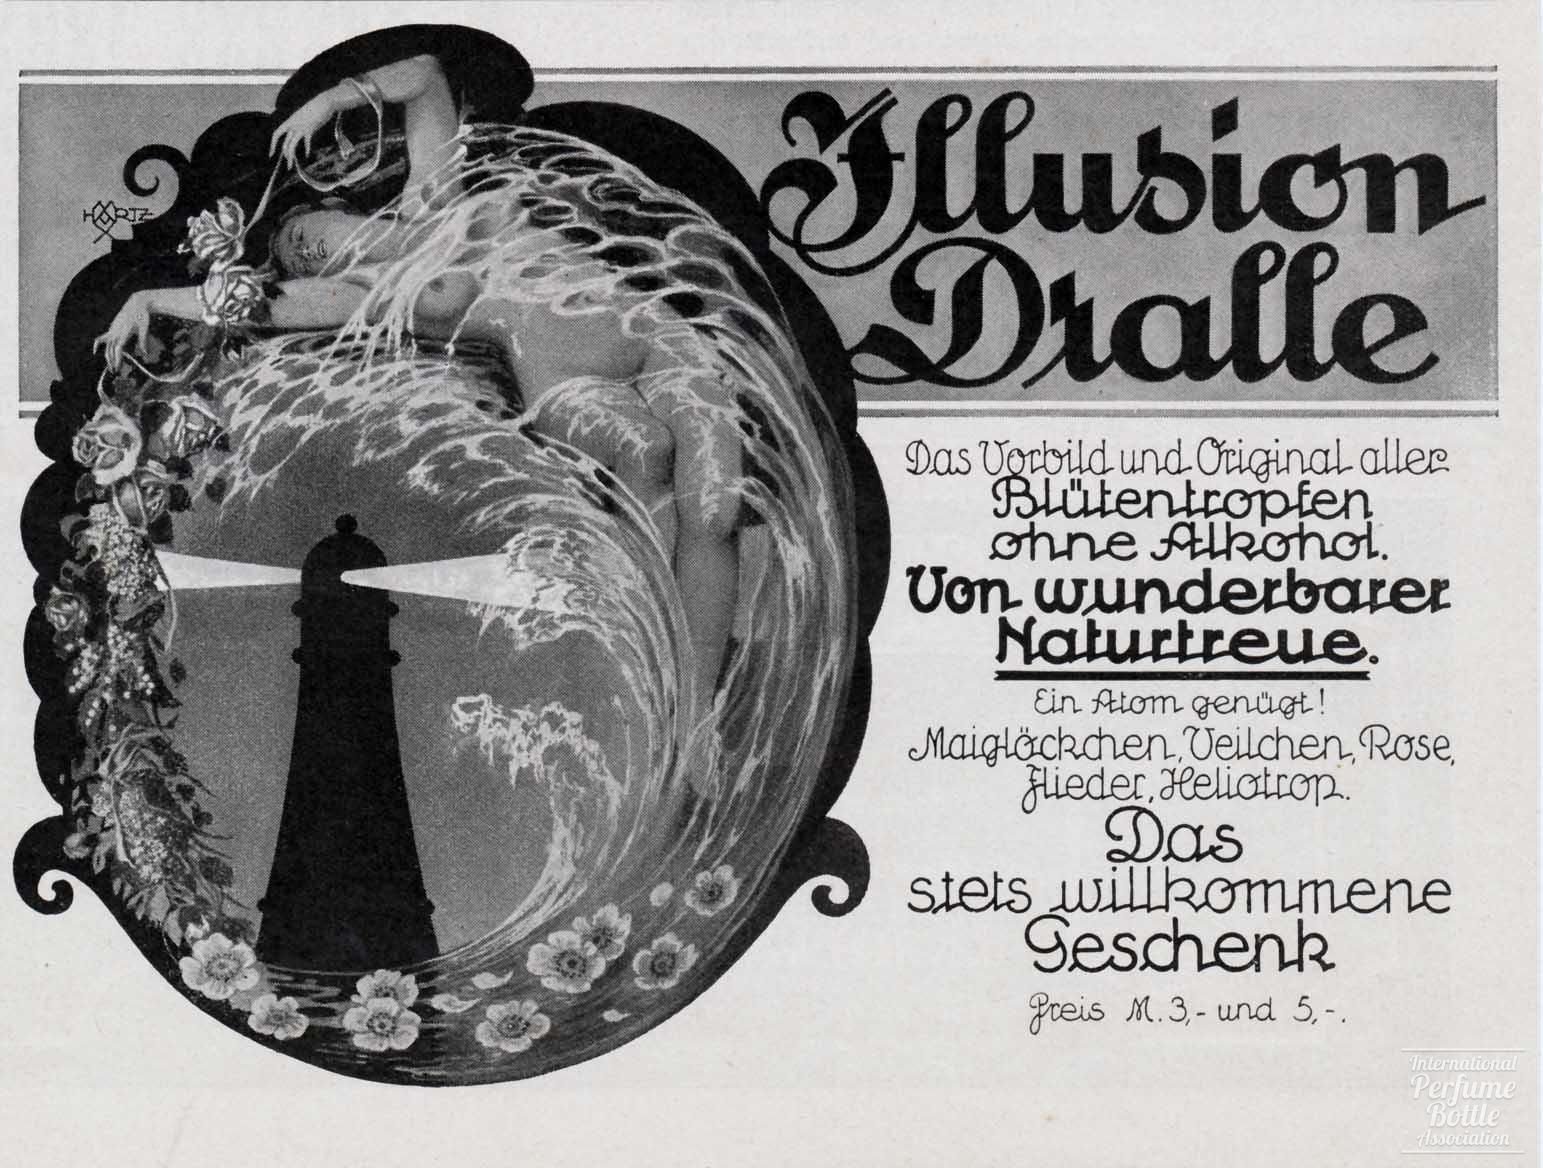 "Illusion" by Dralle Advertisement - 1925